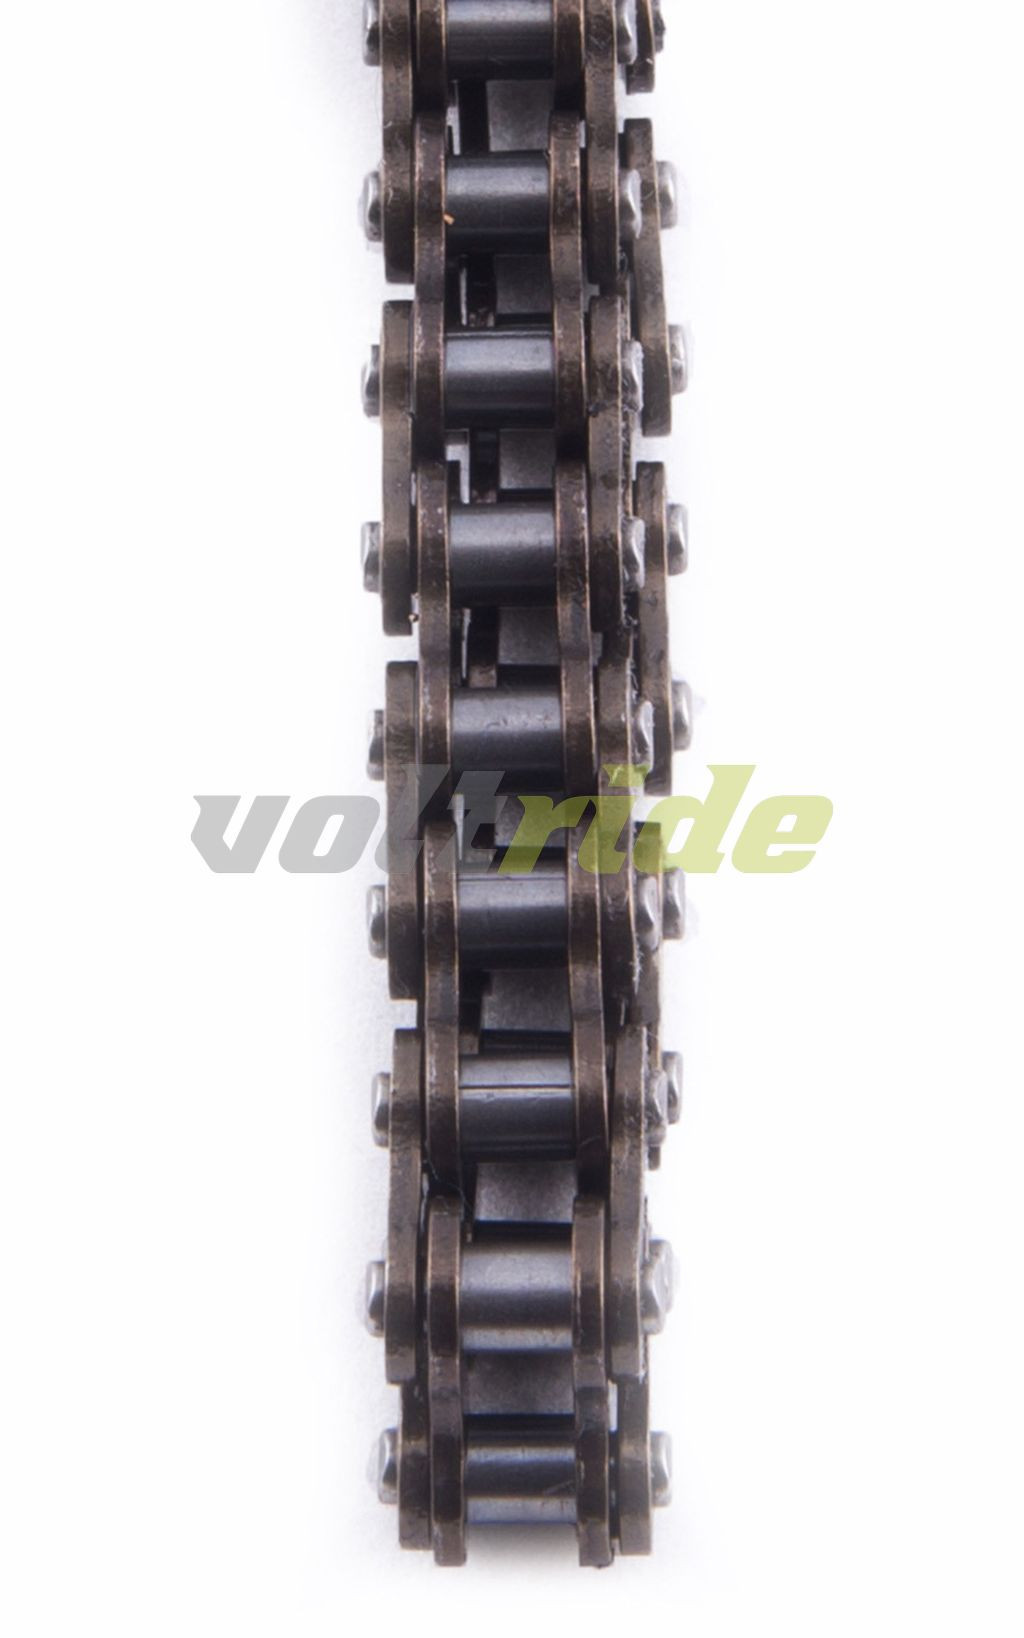 E-shop SXT Thin chain with 42 link - type 25H